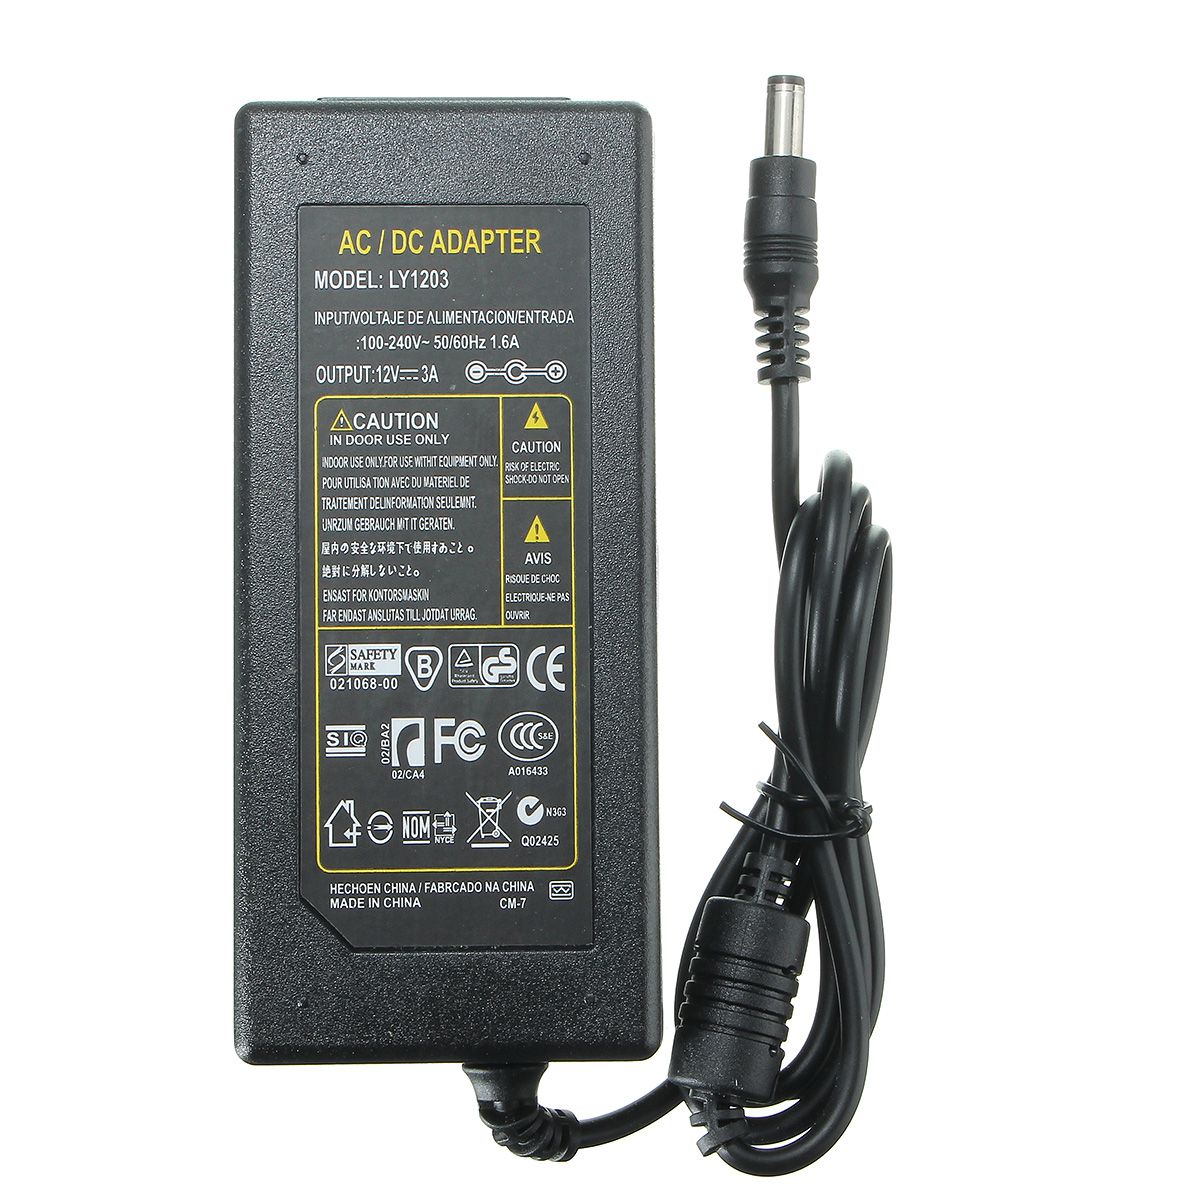 AC-100-240V-to-DC-12V-3A-36W-Power-Supply-Adapter-for-LED-Strip-86979